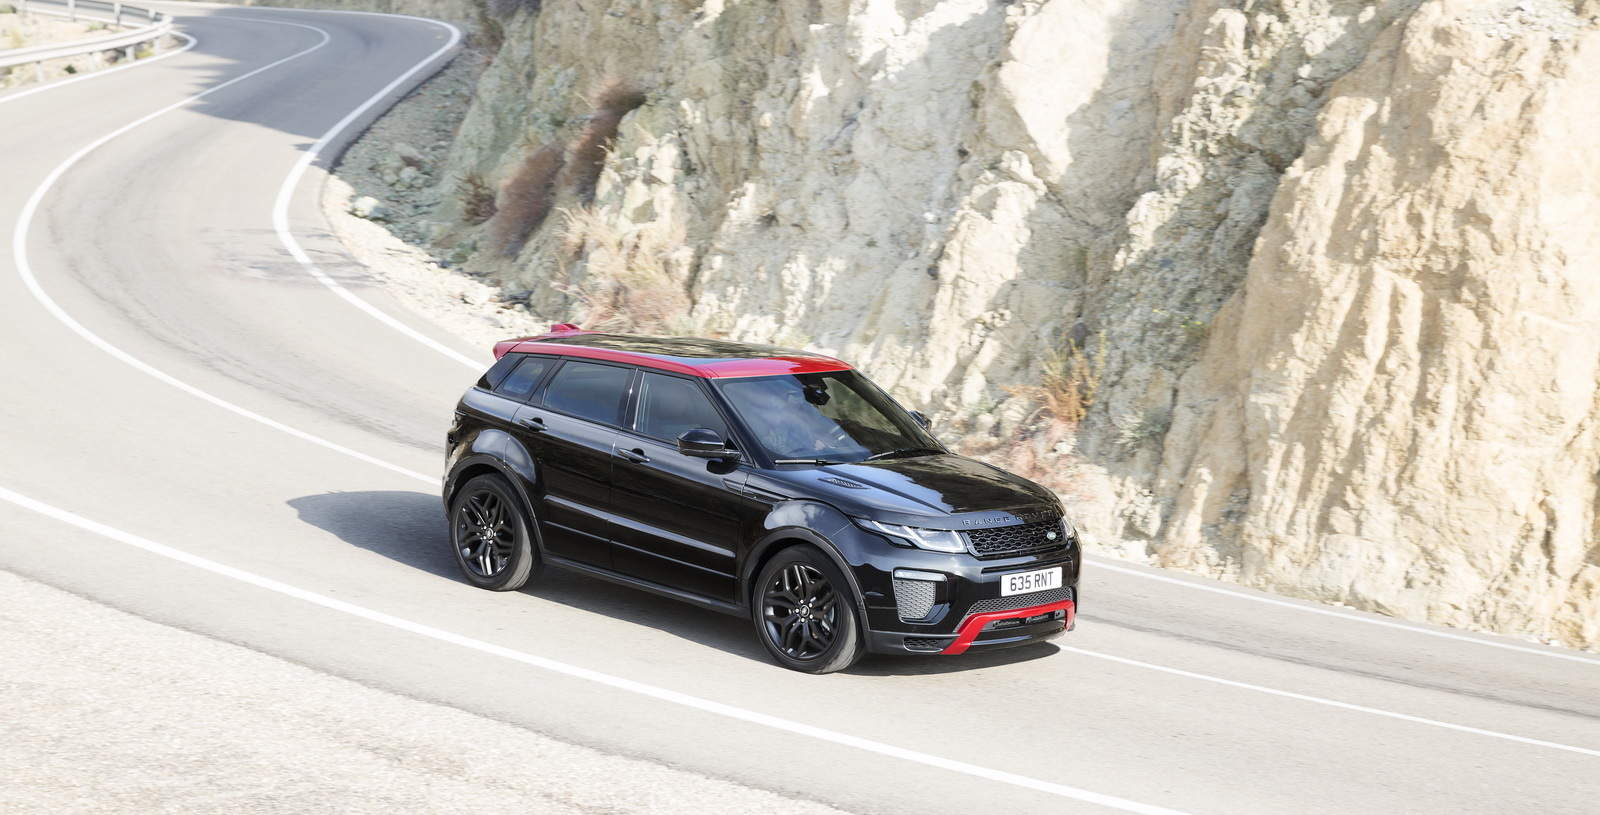 2017-Range-Rover-Evoque-Ember-Limited-Edition-5